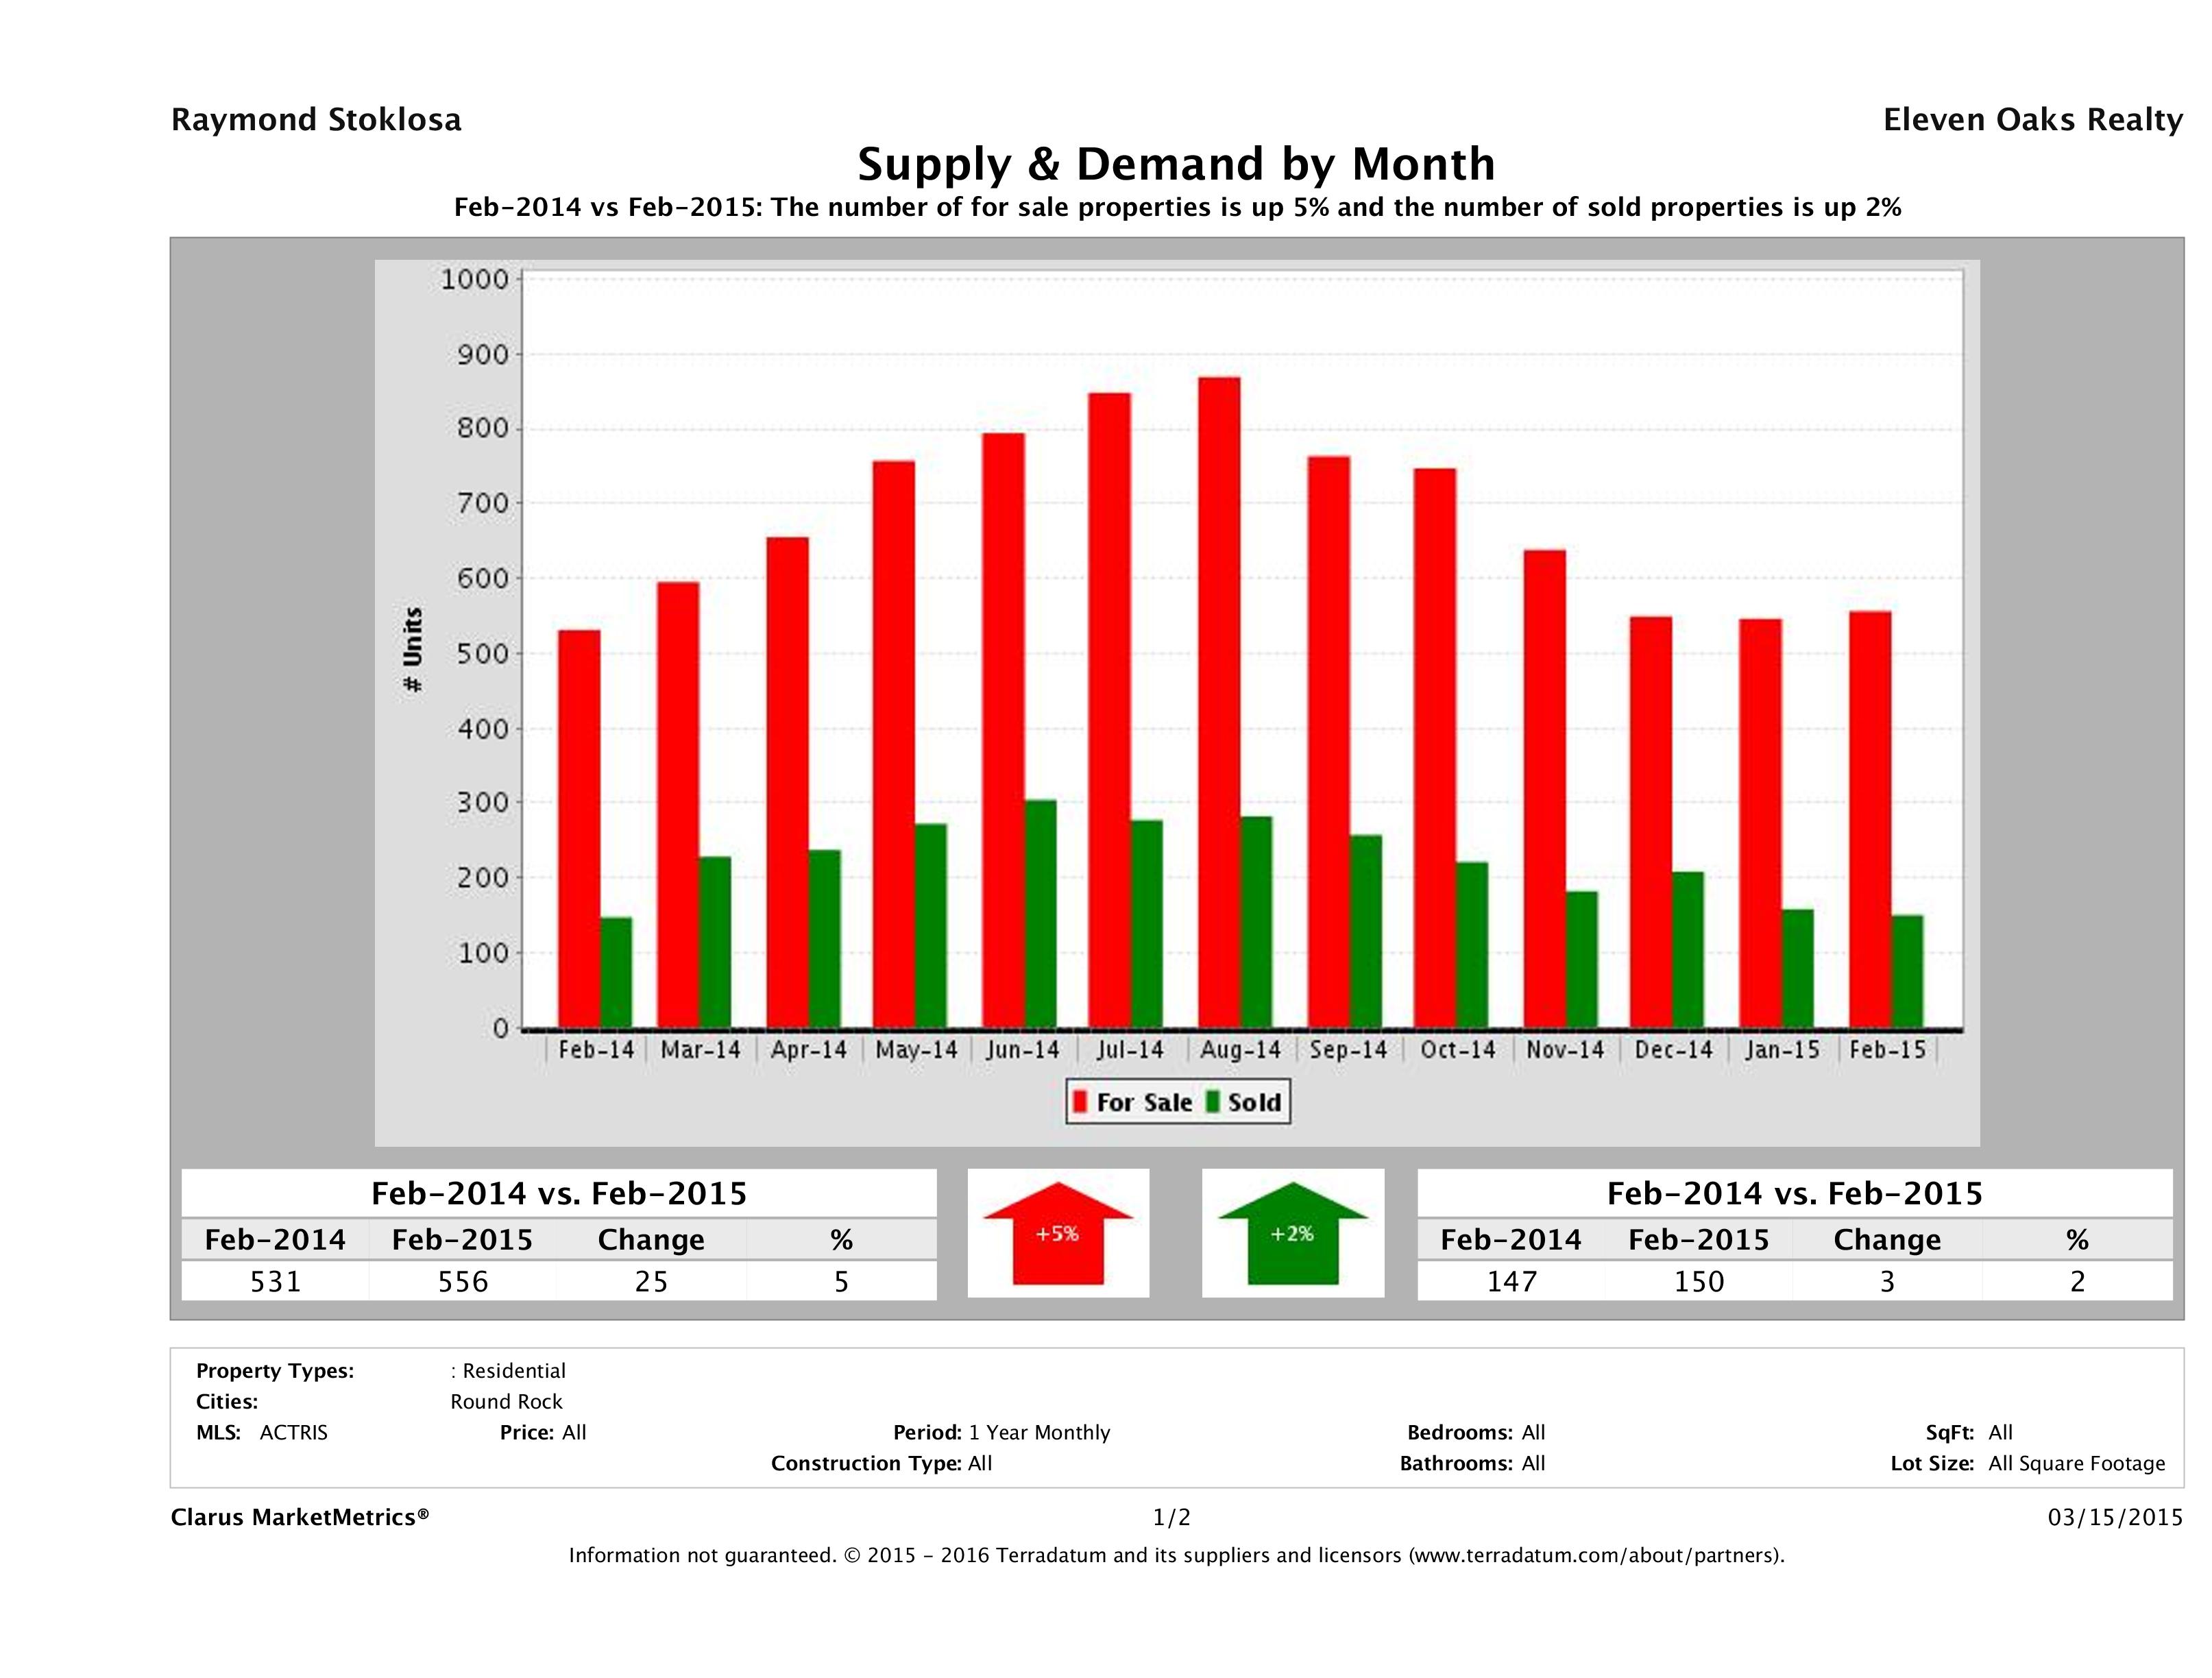 Round Rock real estate market supply and demand February 2015